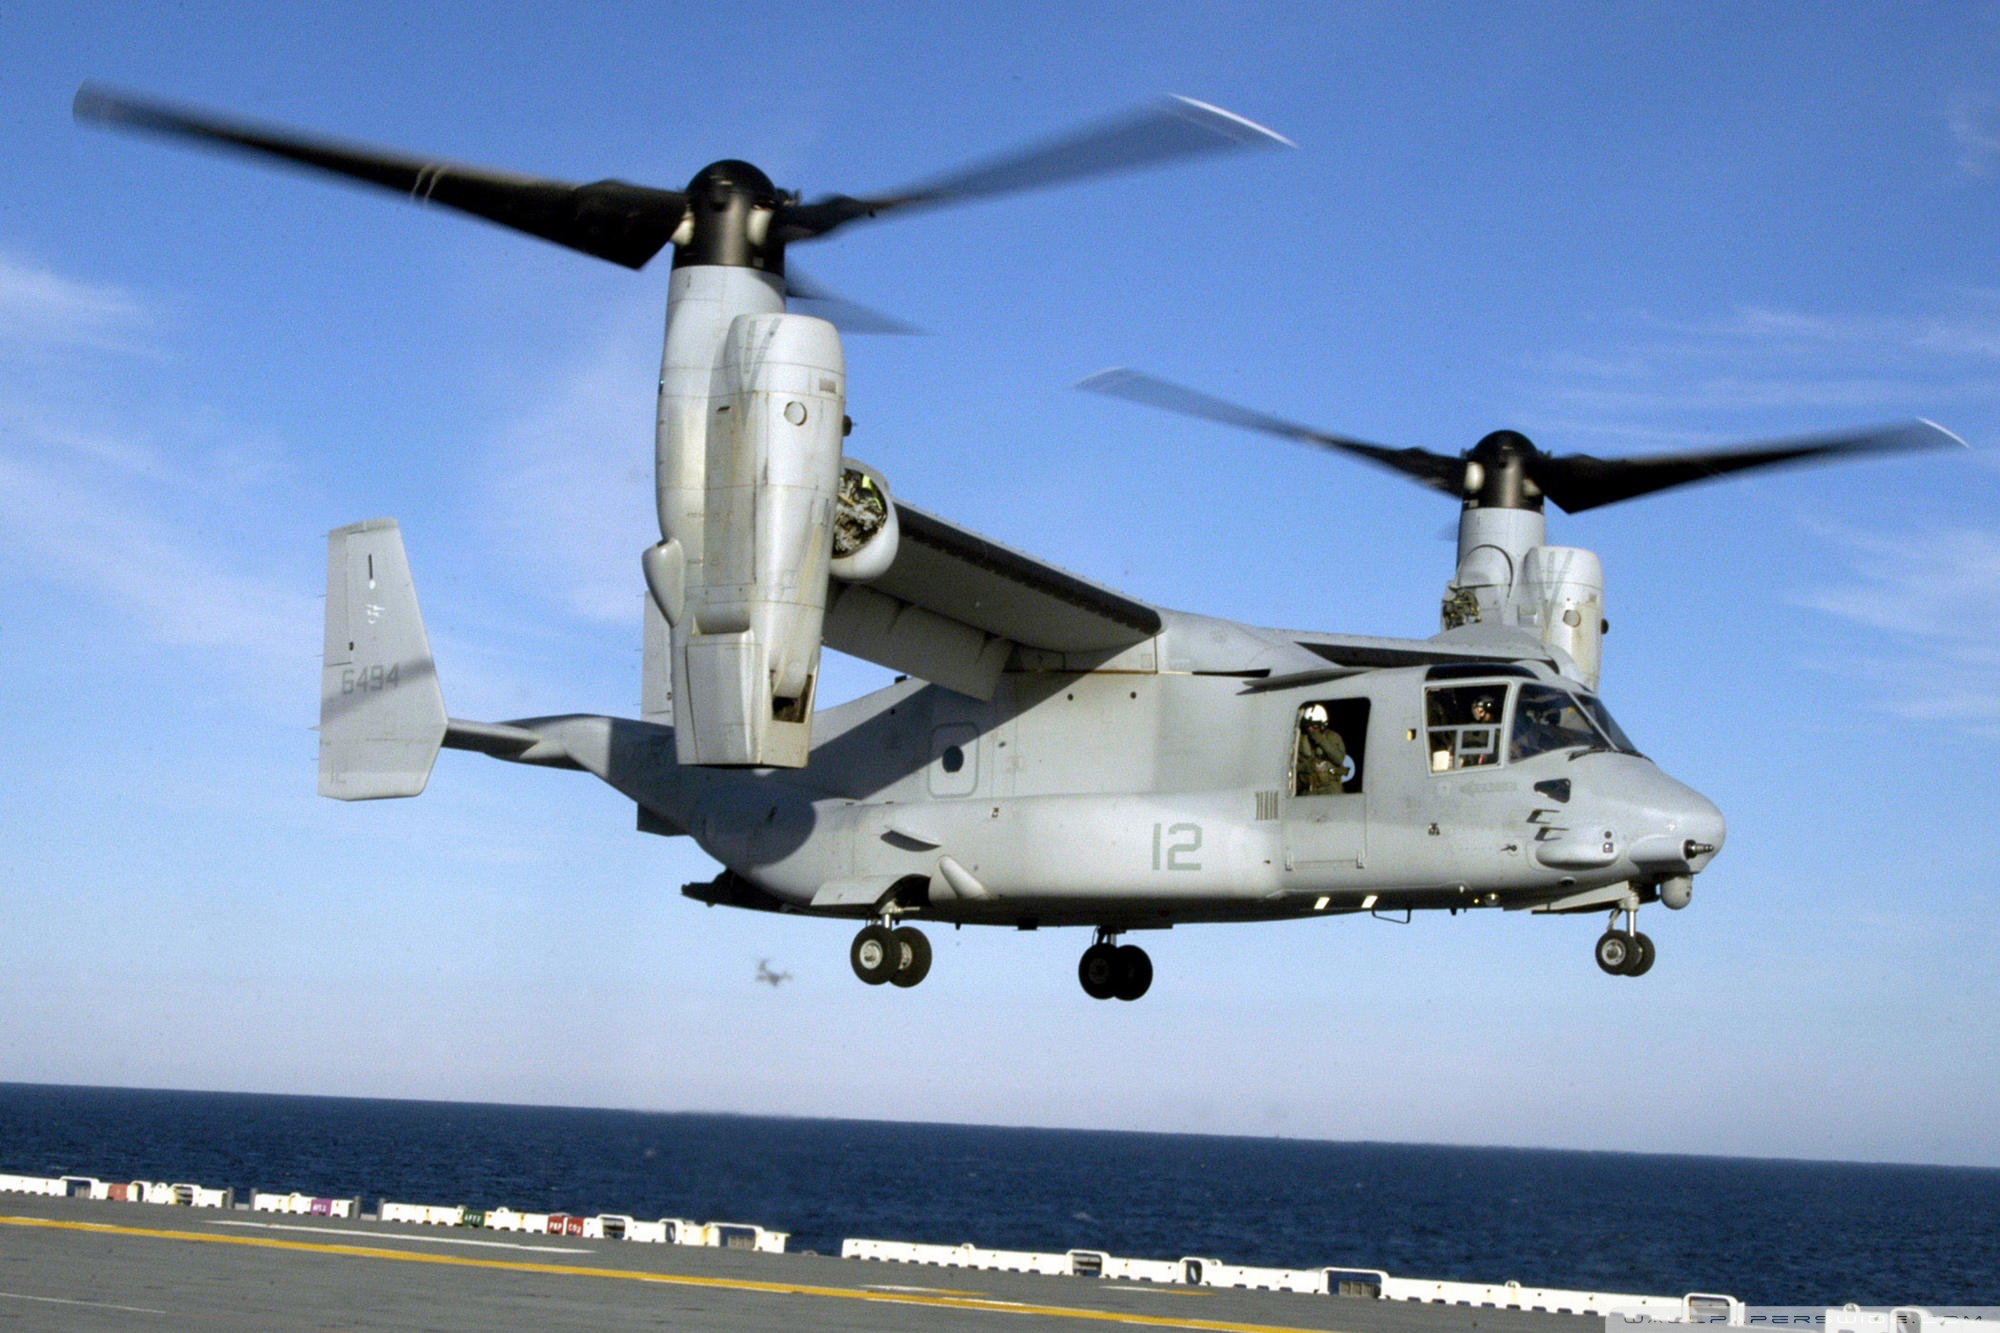 A military aircraft, the Bell Boeing V-22 Osprey, soaring across a vibrant desktop wallpaper.